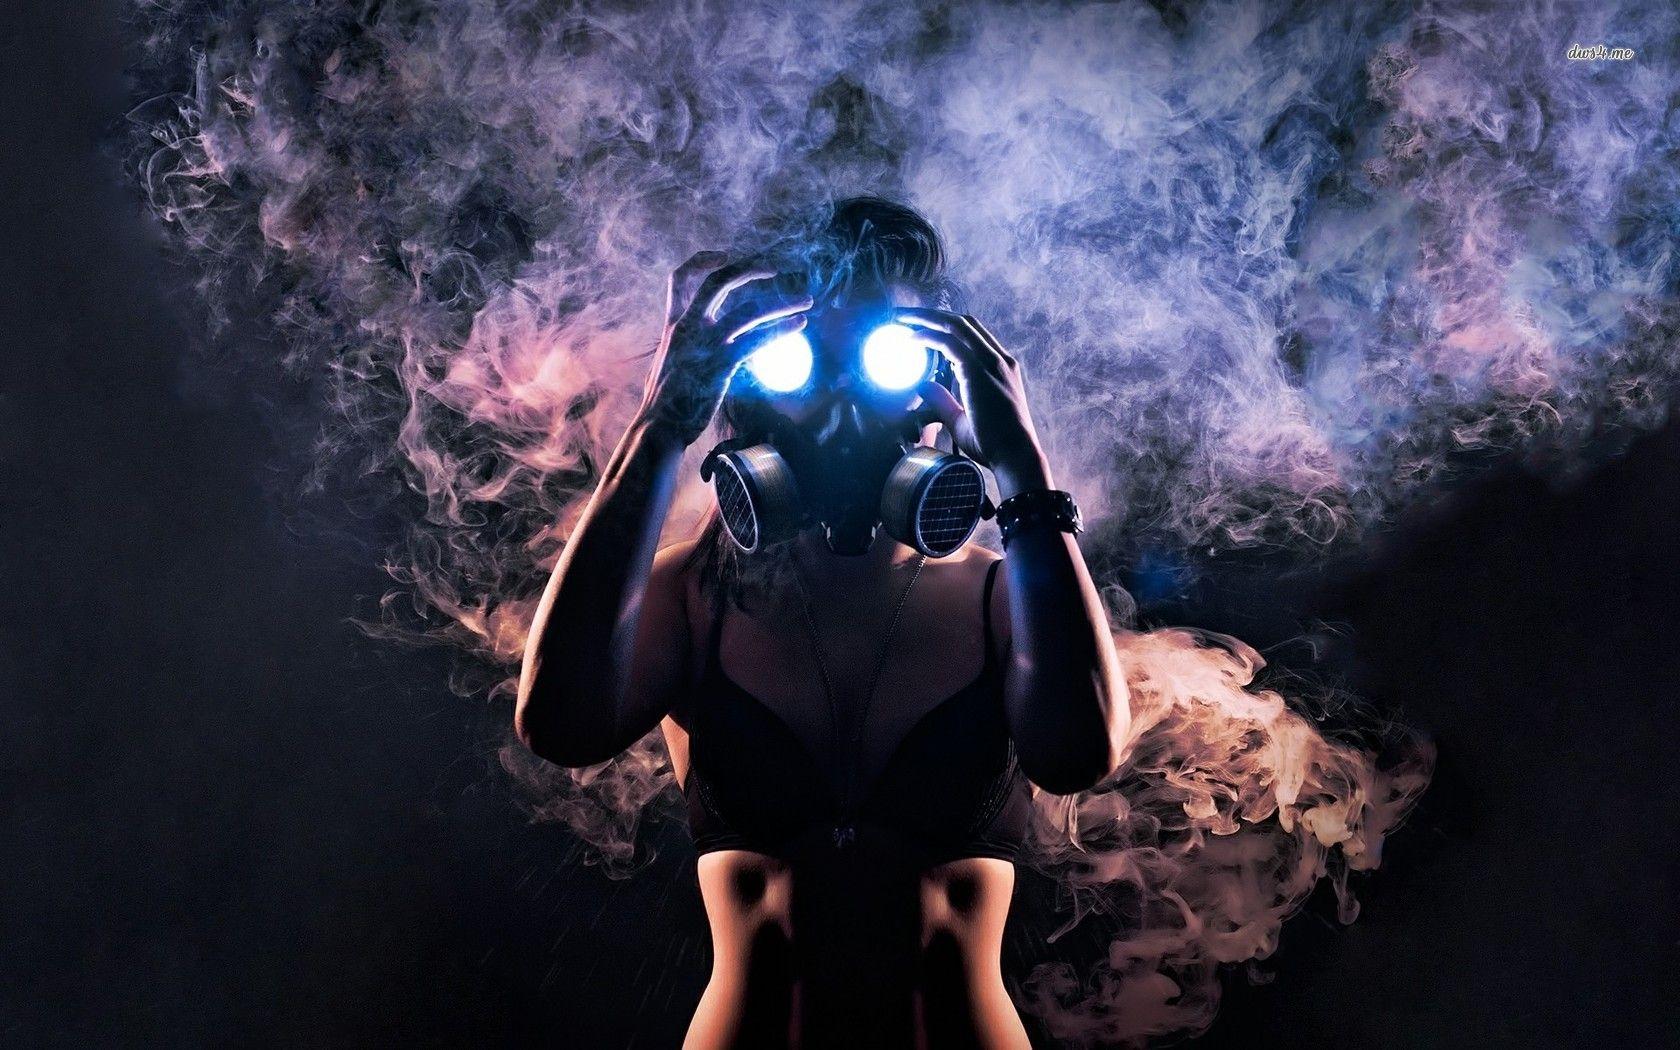 Woman in gas mask. Gas mask girl, Gas mask, Mask girl